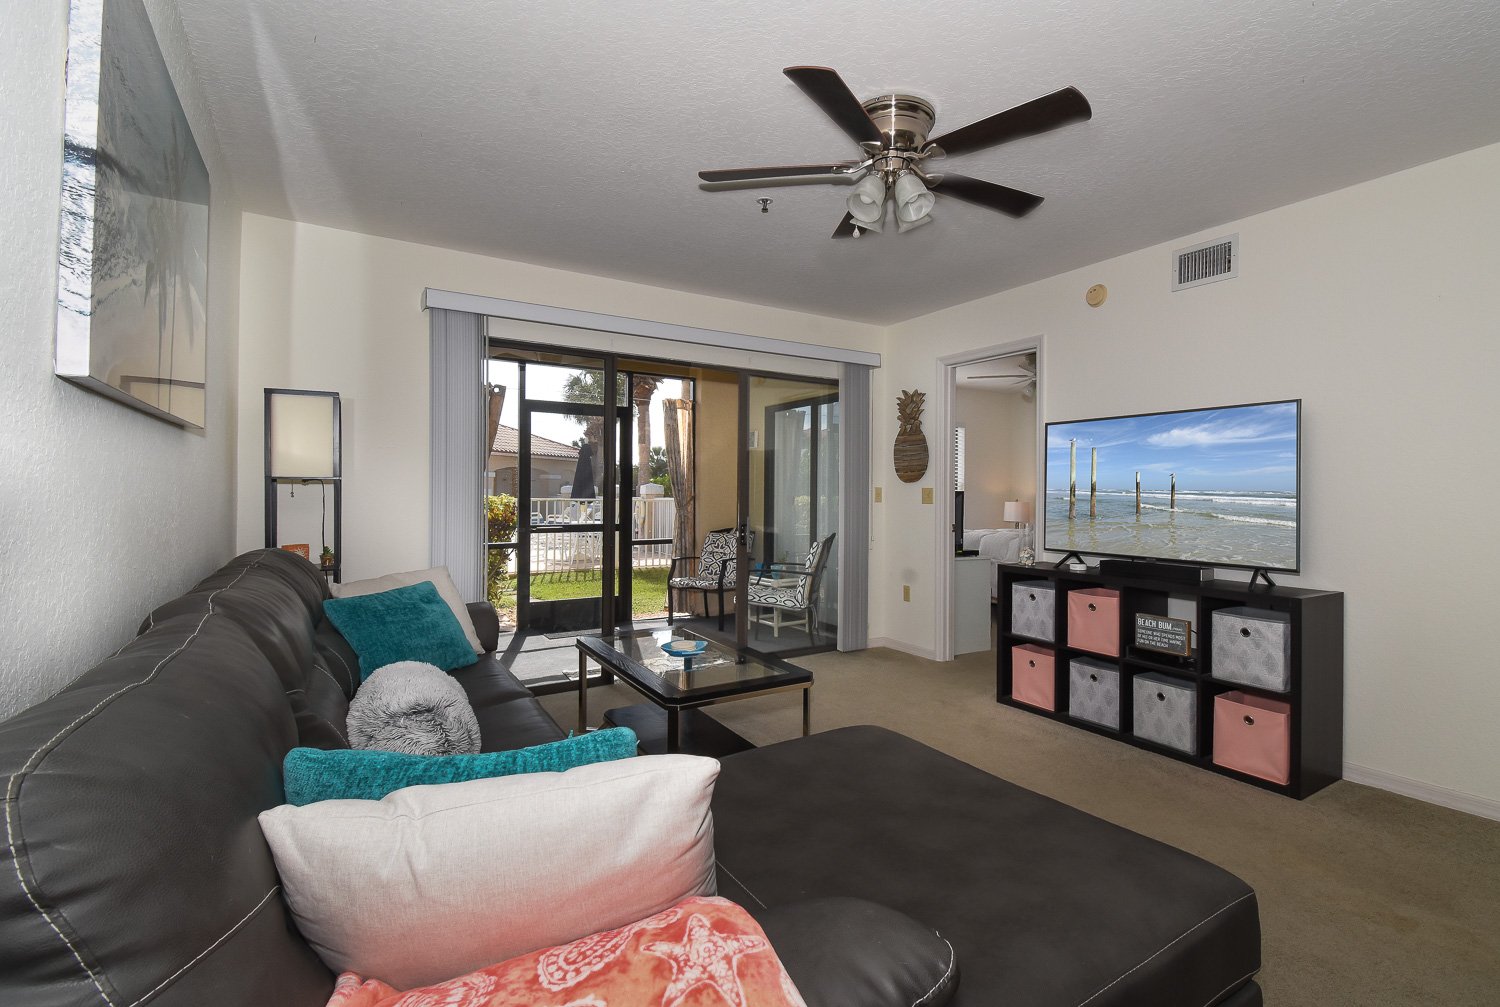 beautiful interior view of a fully furnished condo for rent in new smyrna beach fl